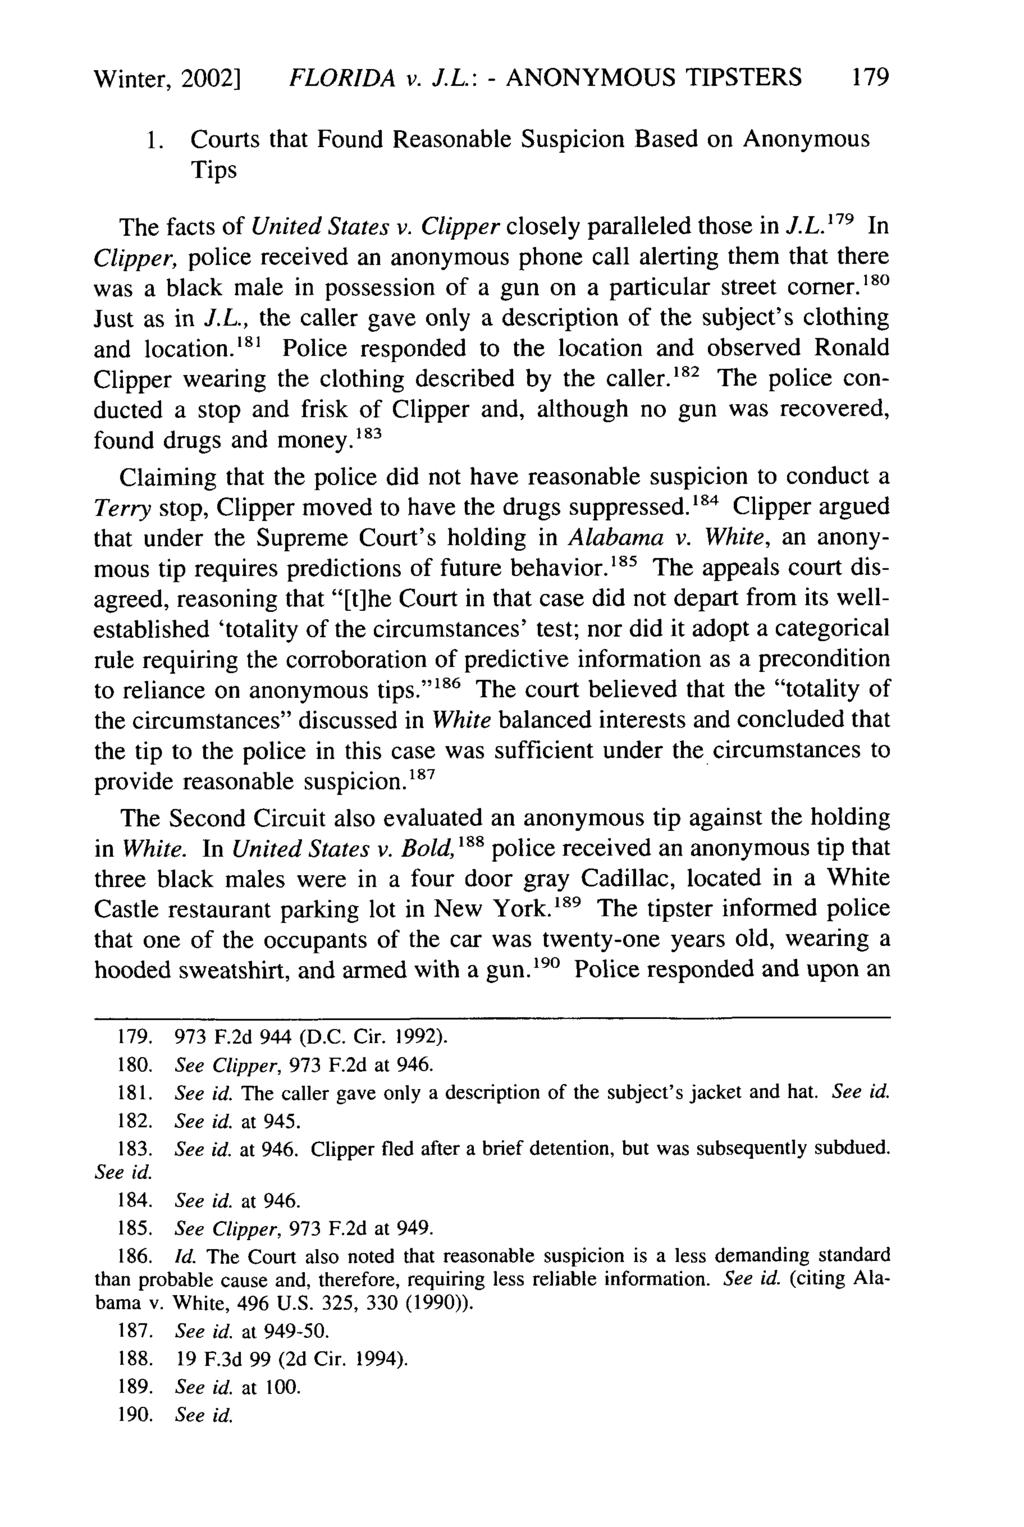 Winter, 2002] FLORIDA v. J.L.: - ANONYMOUS TIPSTERS 1. Courts that Found Reasonable Suspicion Based on Anonymous Tips The facts of United States v. Clipper closely paralleled those in J.L.1 7 9 In Clipper, police received an anonymous phone call alerting them that there was a black male in possession of a gun on a particular street corner.